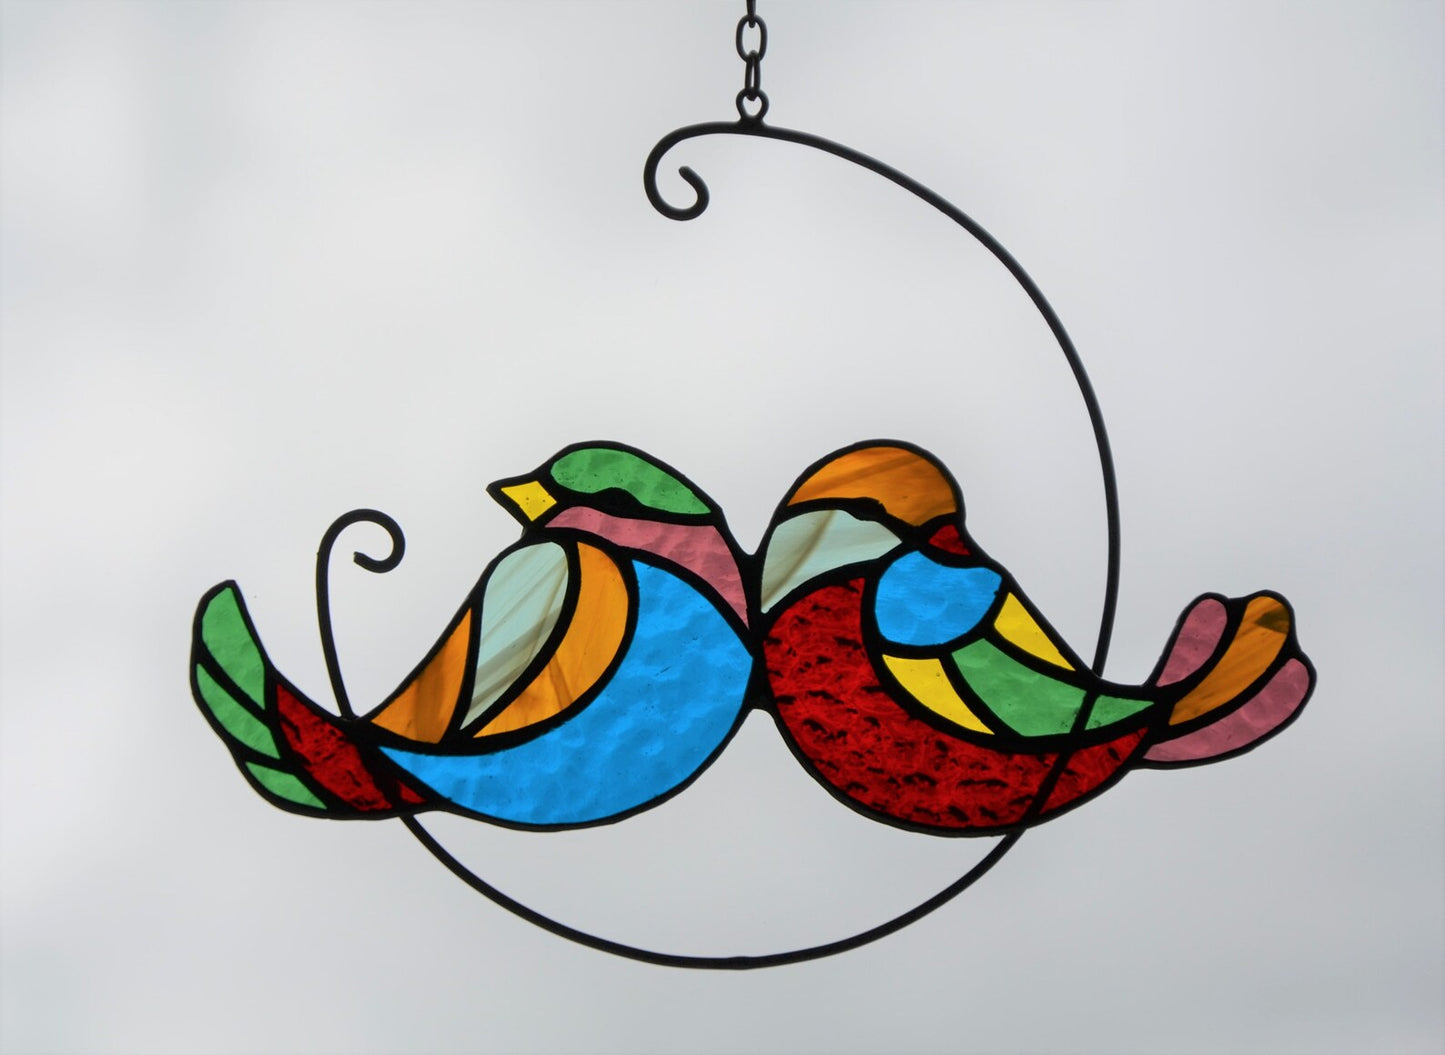 Set of 3 suncatchers Stained glass birds Stain glass composition Window hanging stain glass sun catchers Gift kit Stained glass panel